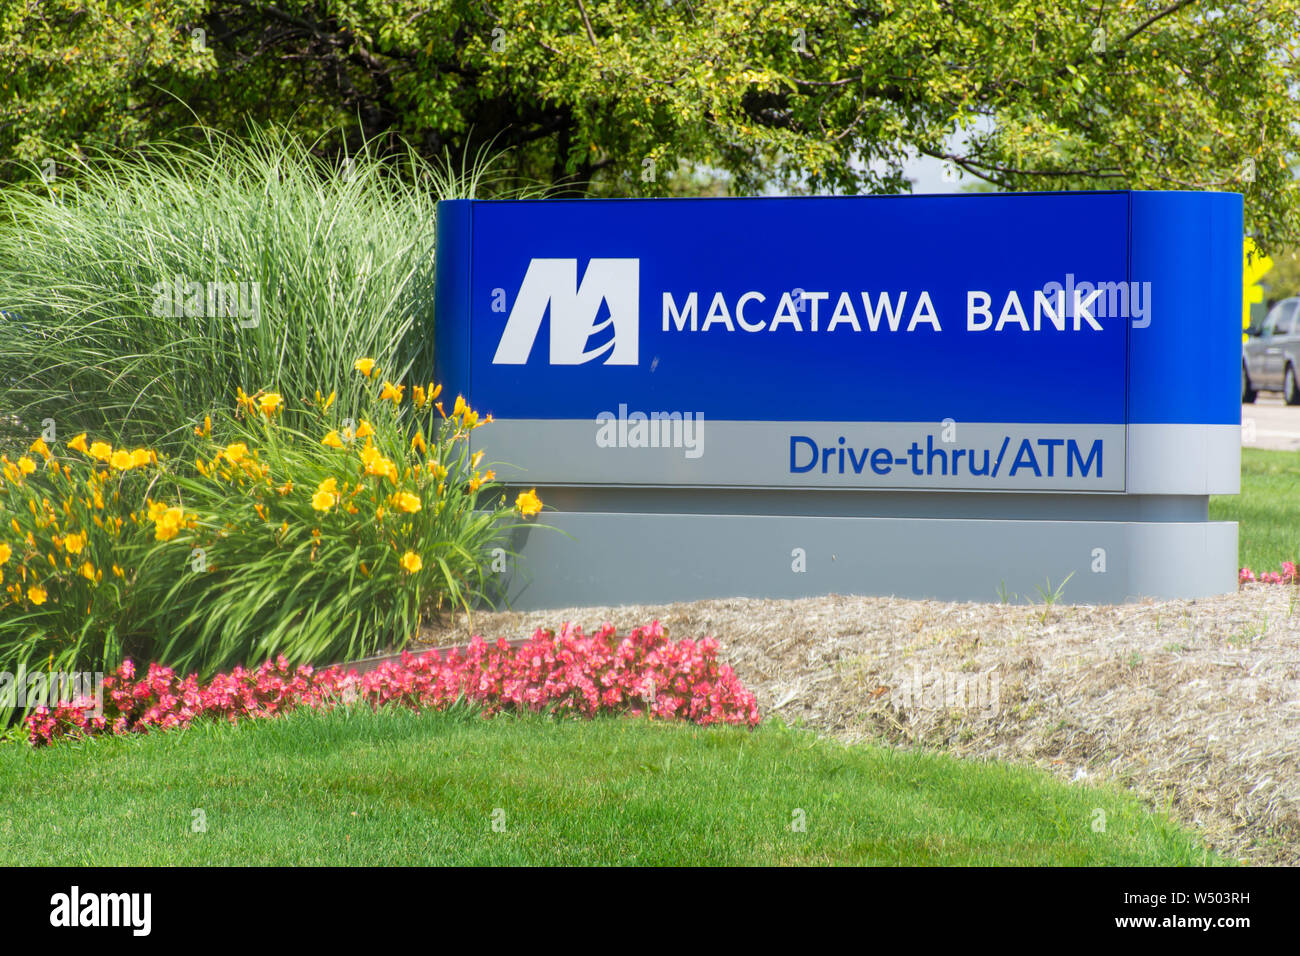 'Holland, Michigan/United States of America - 07/17/2019: Blue Macatawa Bank Sign with drive thru, atm and flowers on green grass and blue sky.' Stock Photo